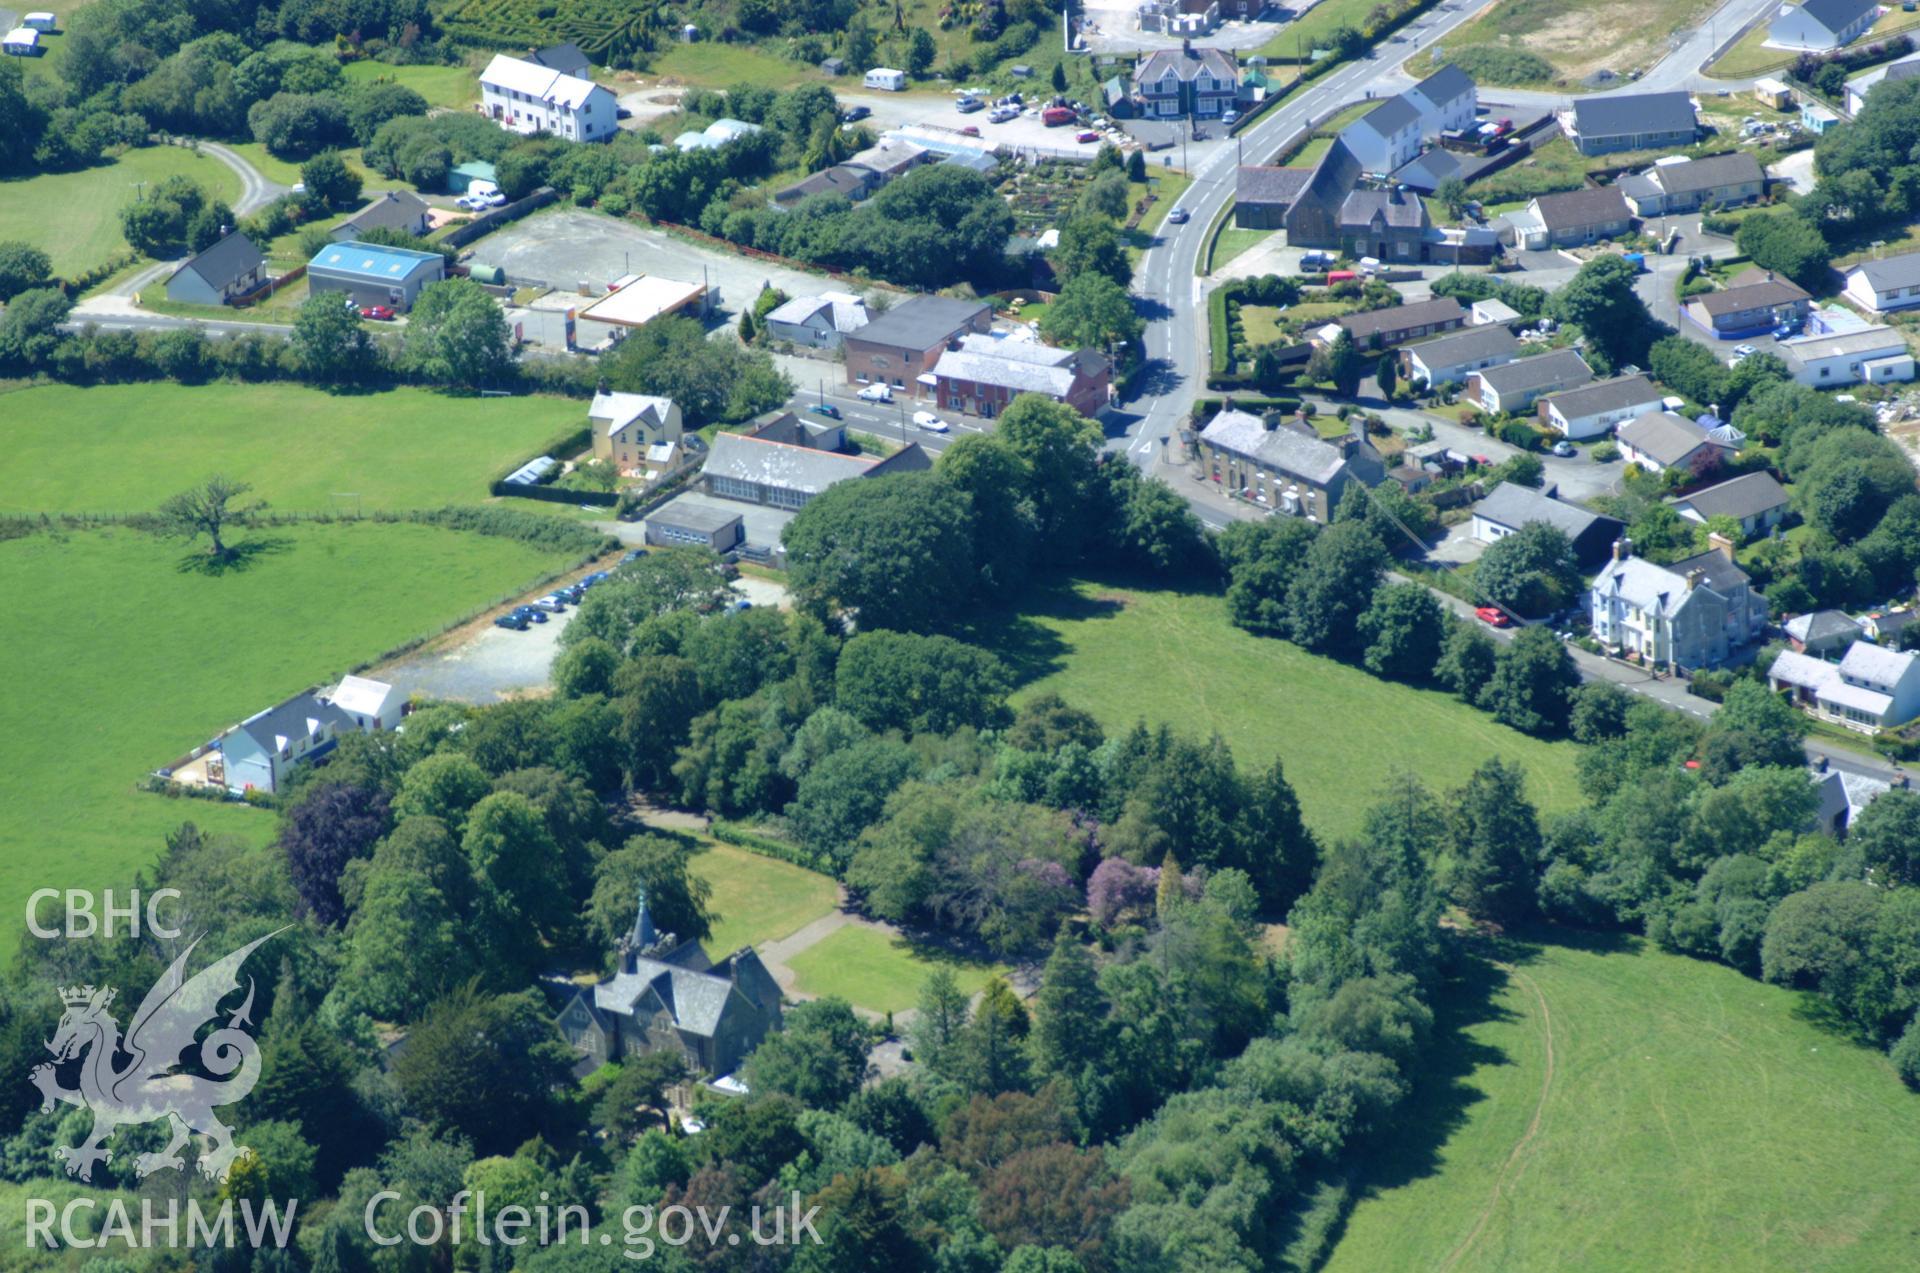 RCAHMW colour oblique aerial photograph of Llanarth National School taken on 14/06/2004 by Toby Driver